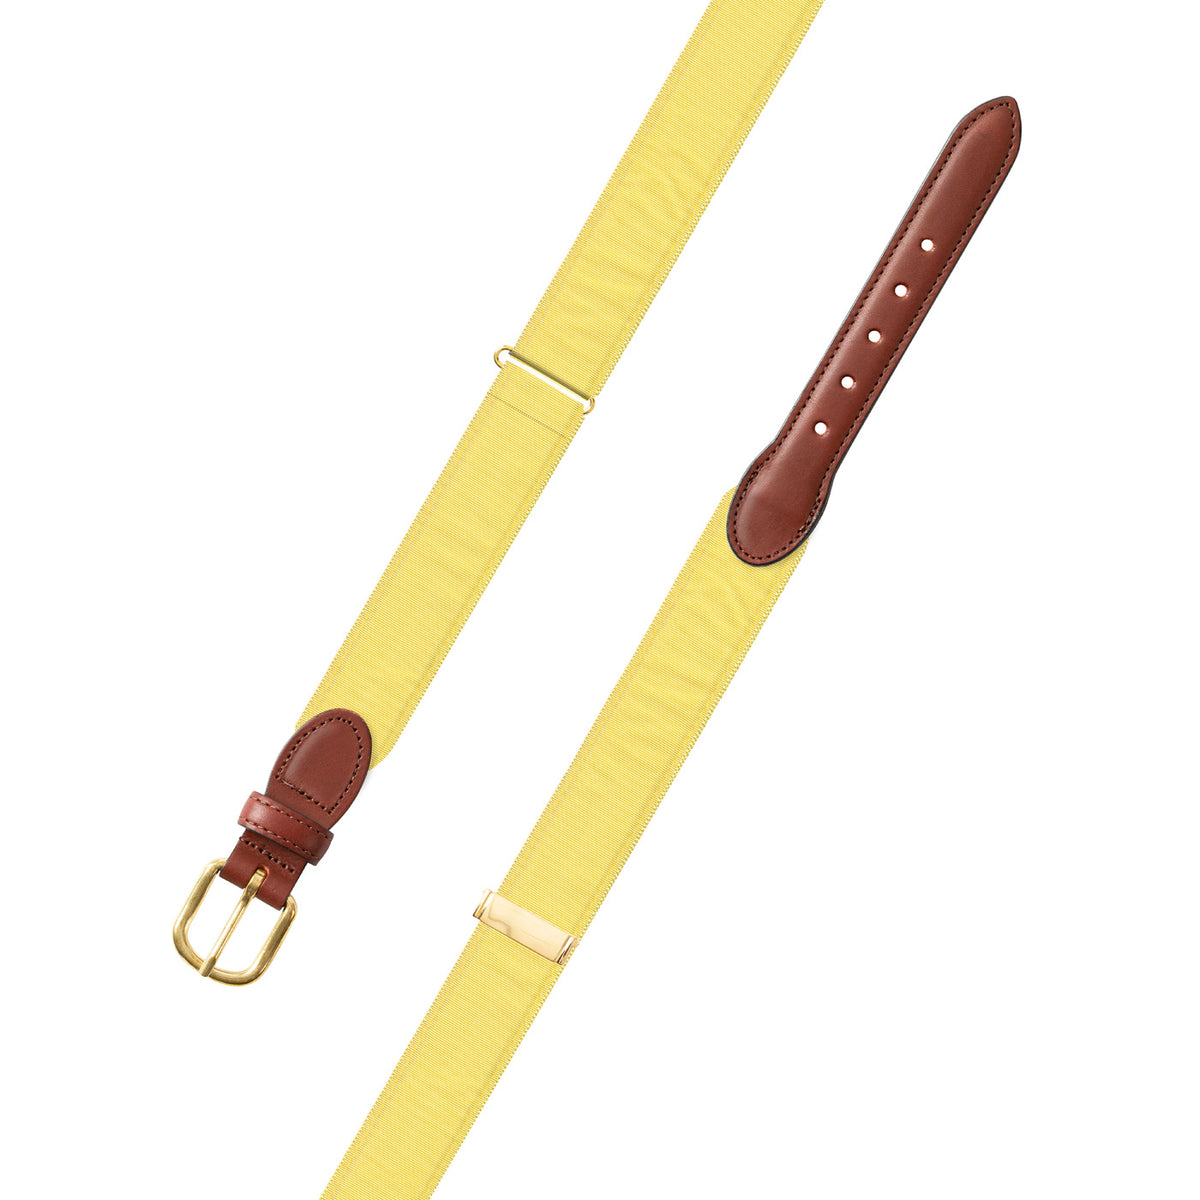 Adjustable Yellow Grosgrain Belt with Brown Leather Tabs